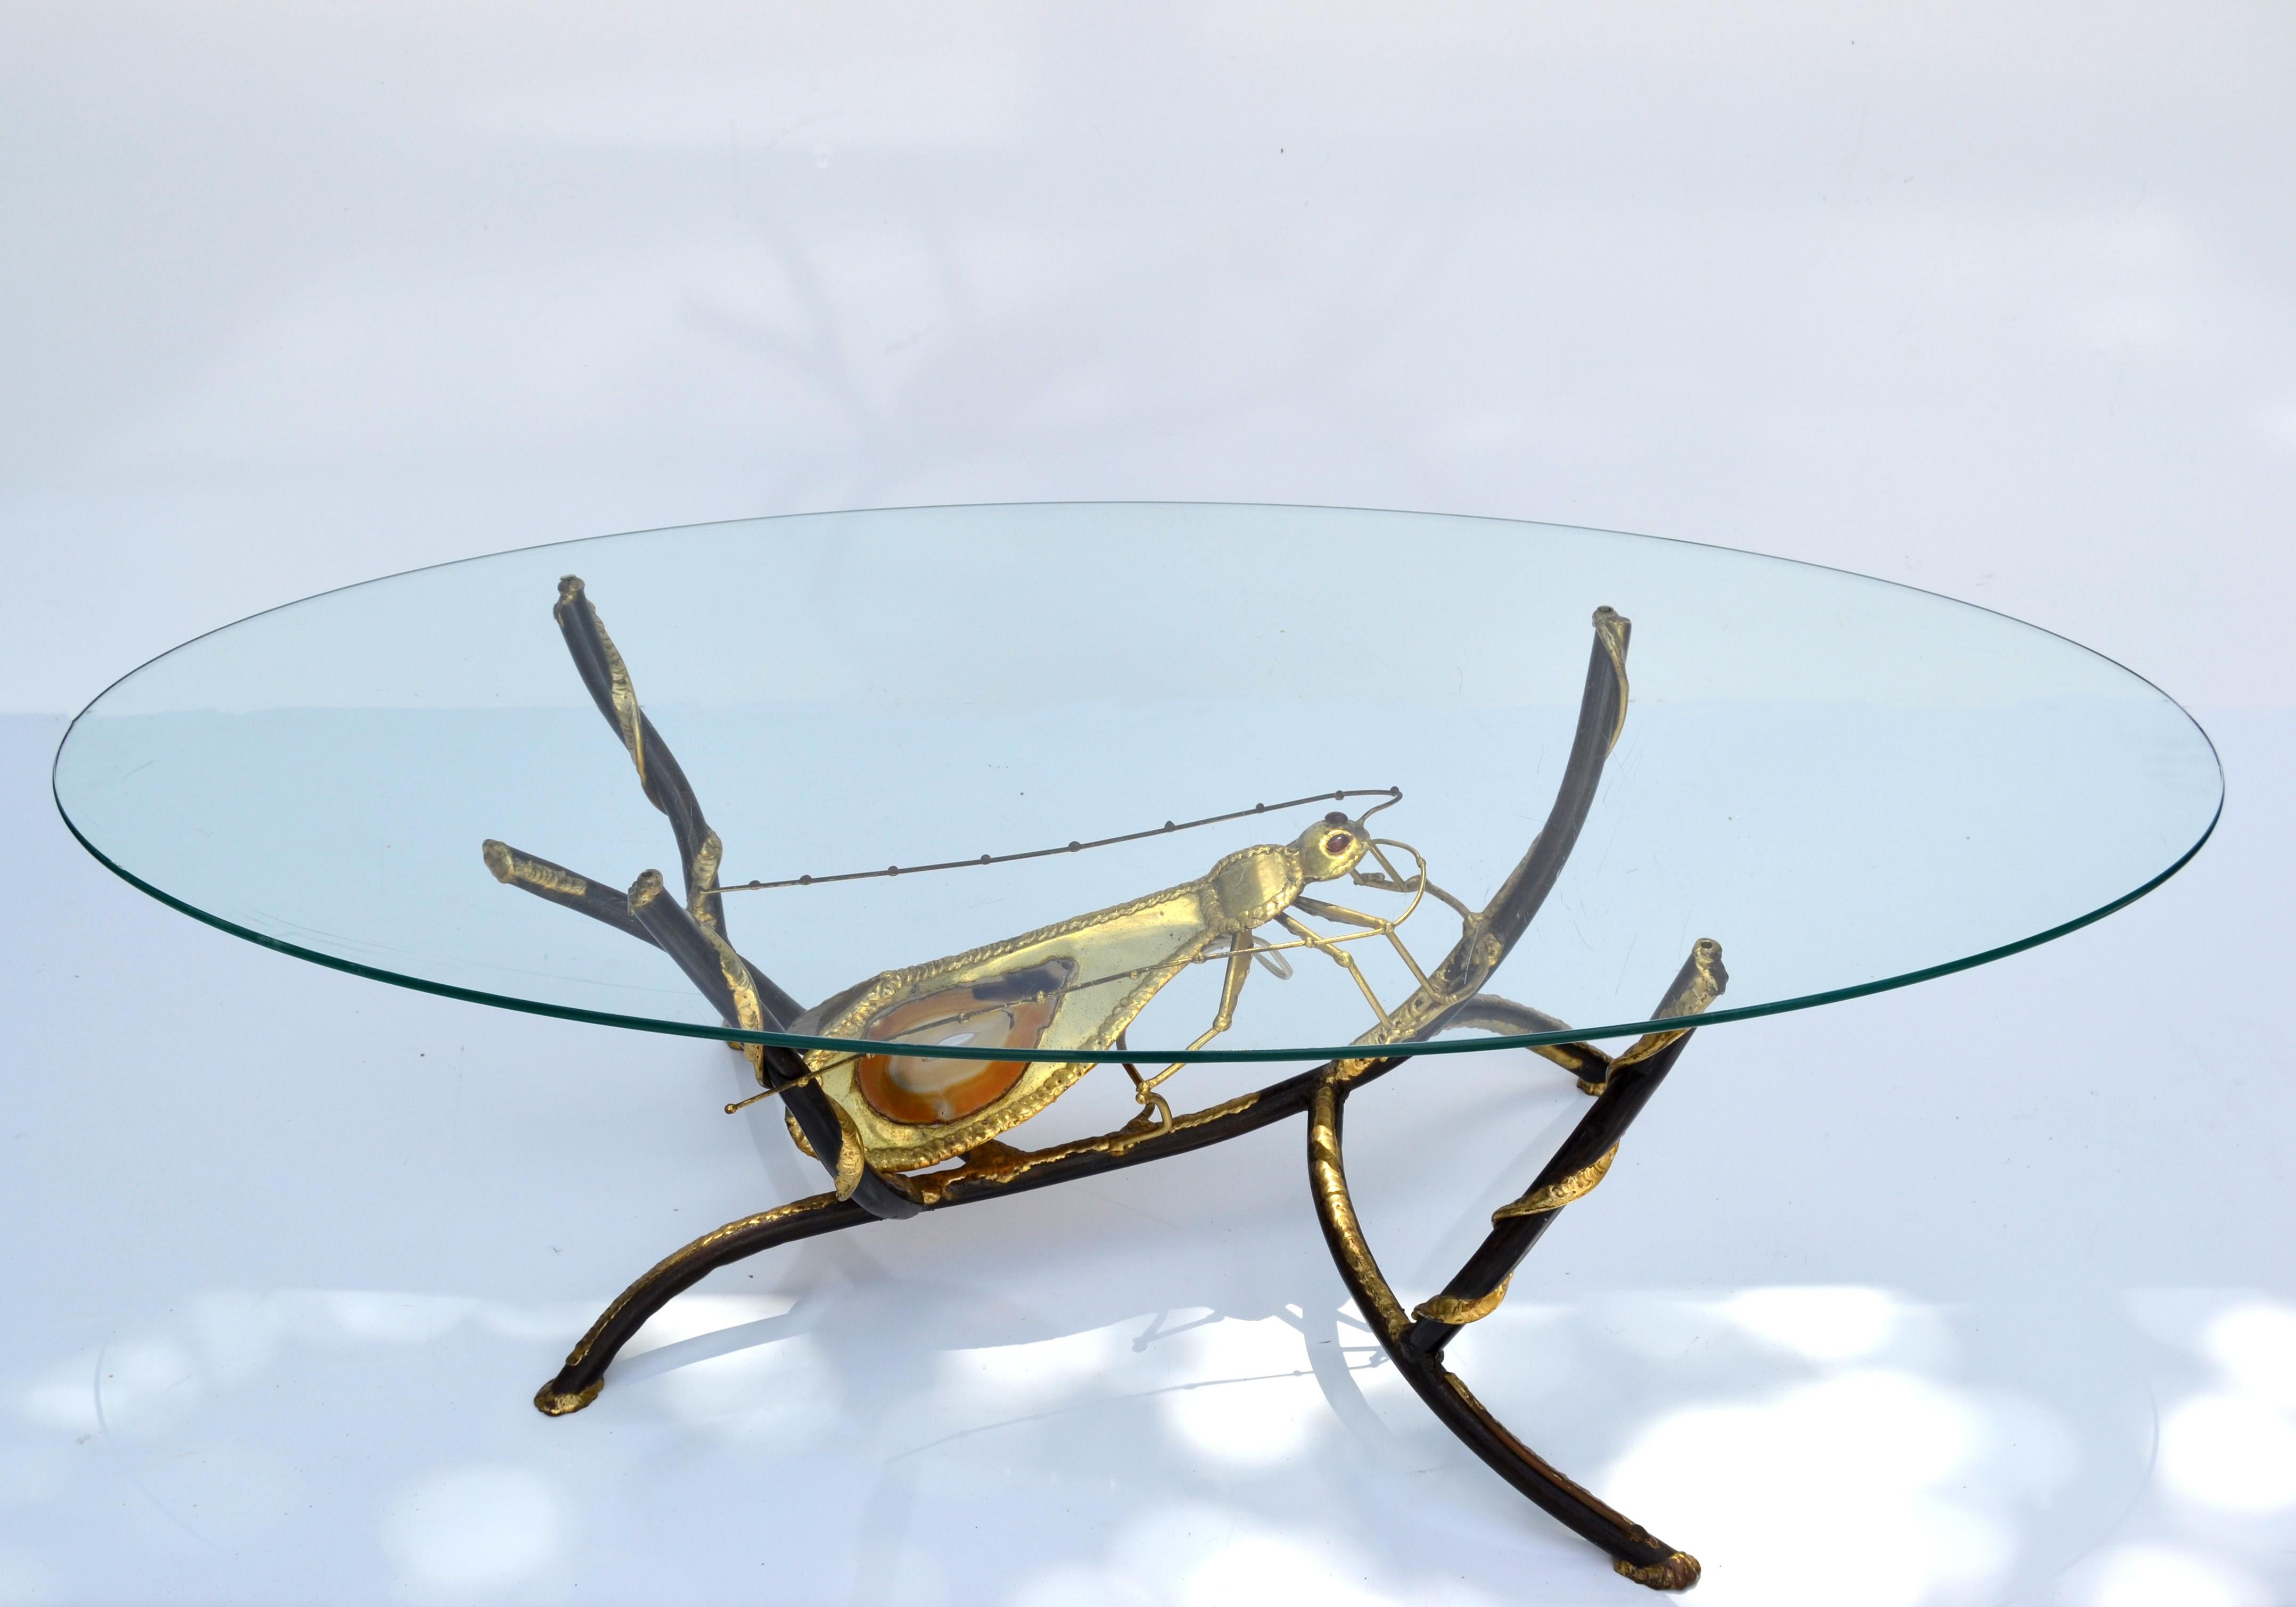 Atelier Duval-Brasseur signed Henri Fernandez illuminated grasshopper with two agates for an unusual elegant and rare coffee table complimented by a oval clear glass top.
Wired for US and in working condition takes 1 candelabra light bulb max. 60